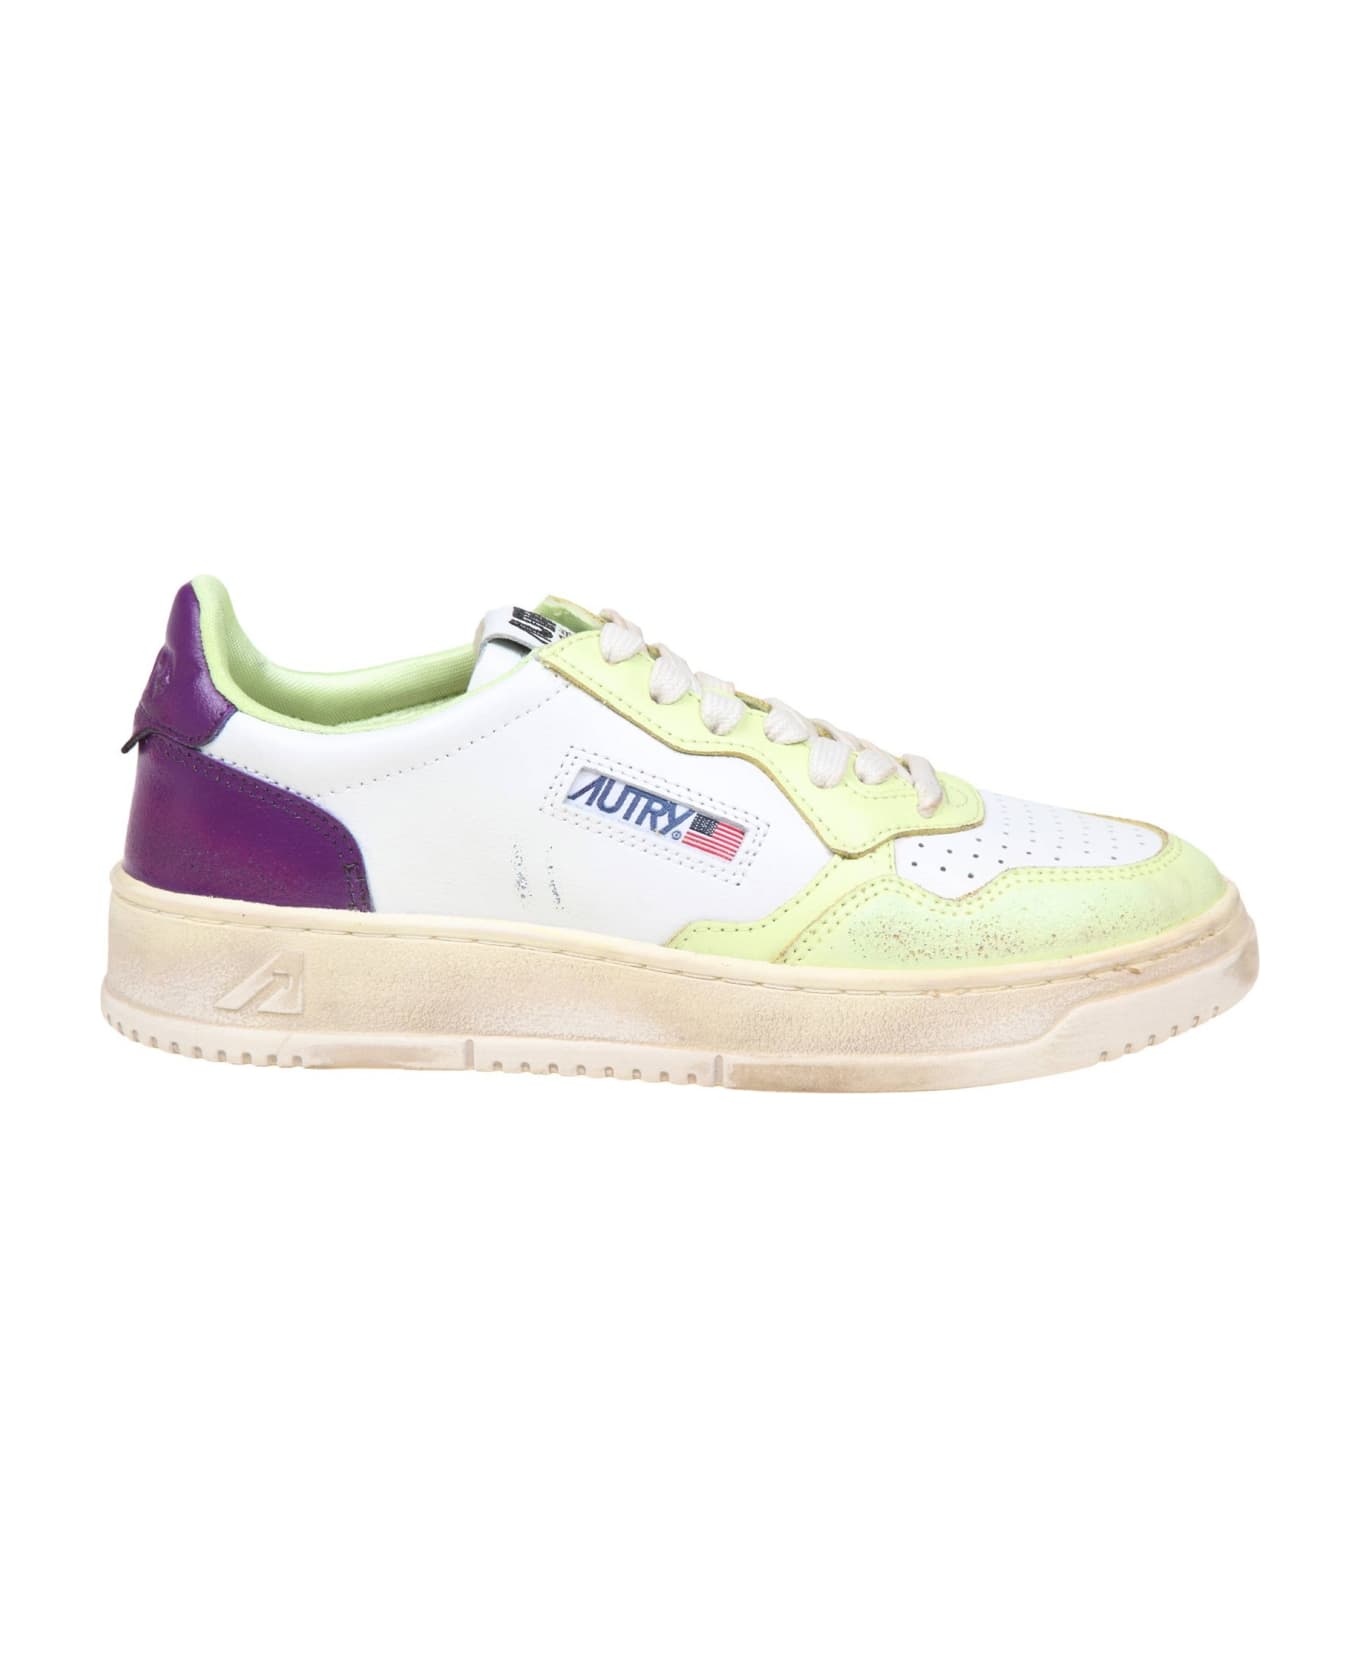 Autry Sneakers In Super Vintage Leather - Wht/slm/mprp